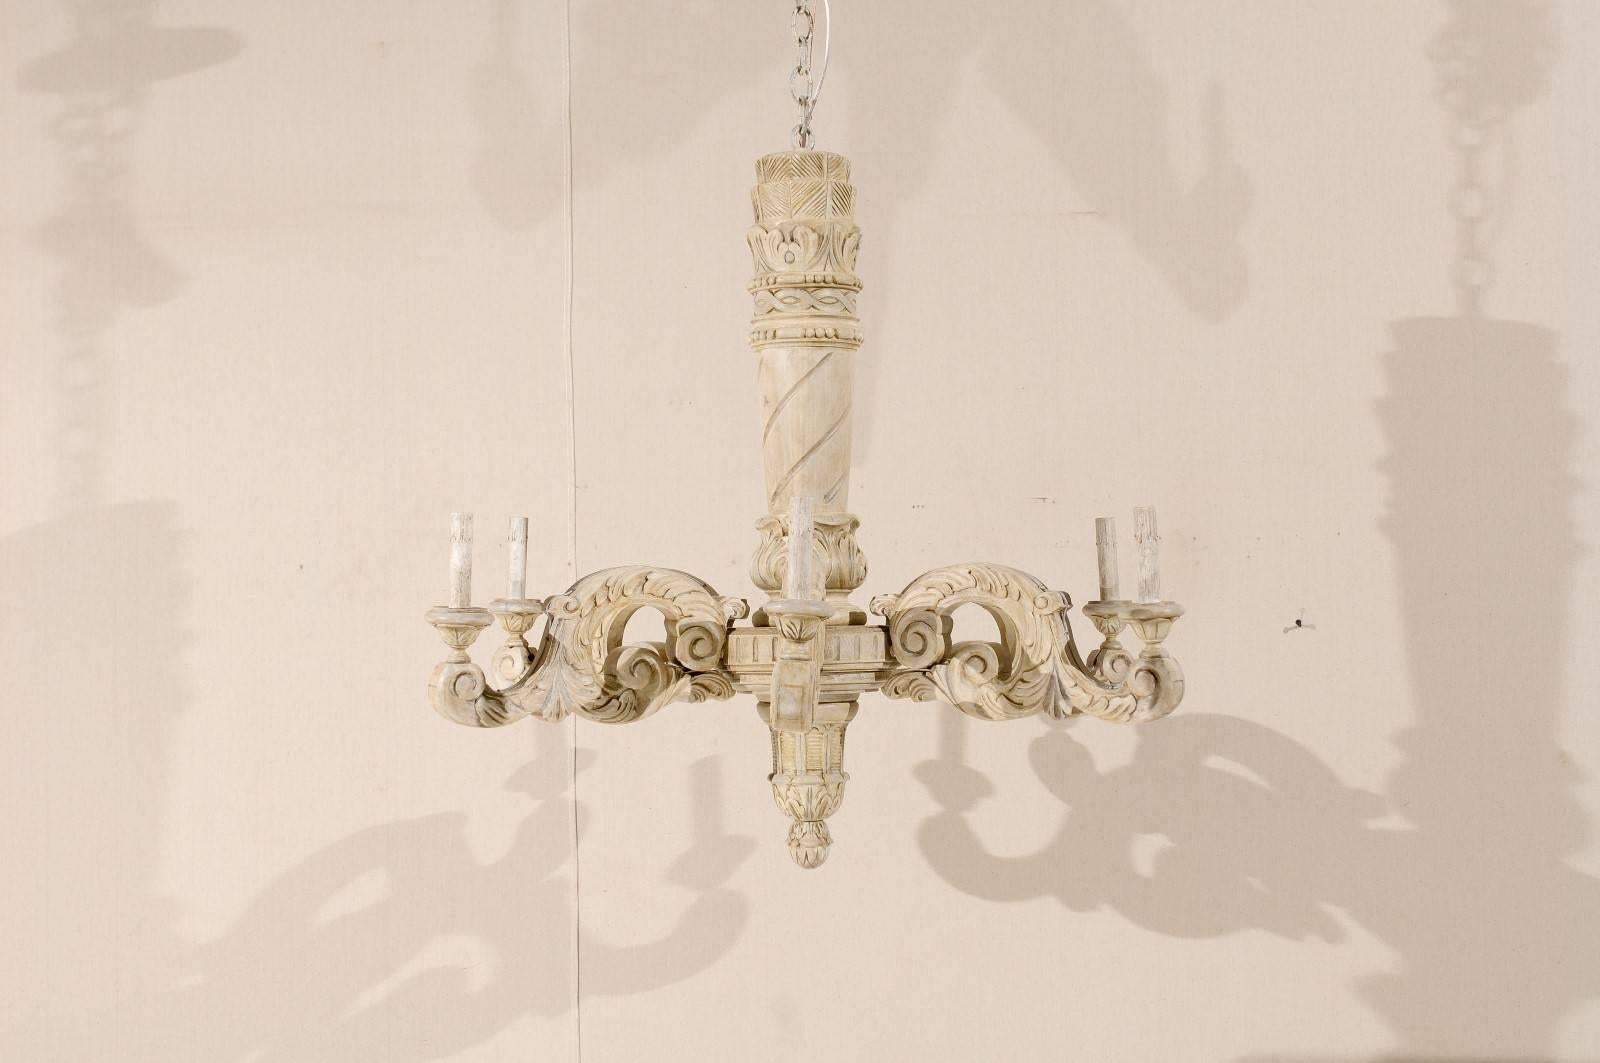 A French carved and painted wood six-light chandelier. This lovely French chandelier from the mid-20th century features a carved central column with six scrolled arms emerging outward that are each adorned with acanthus leaf motifs. The carved